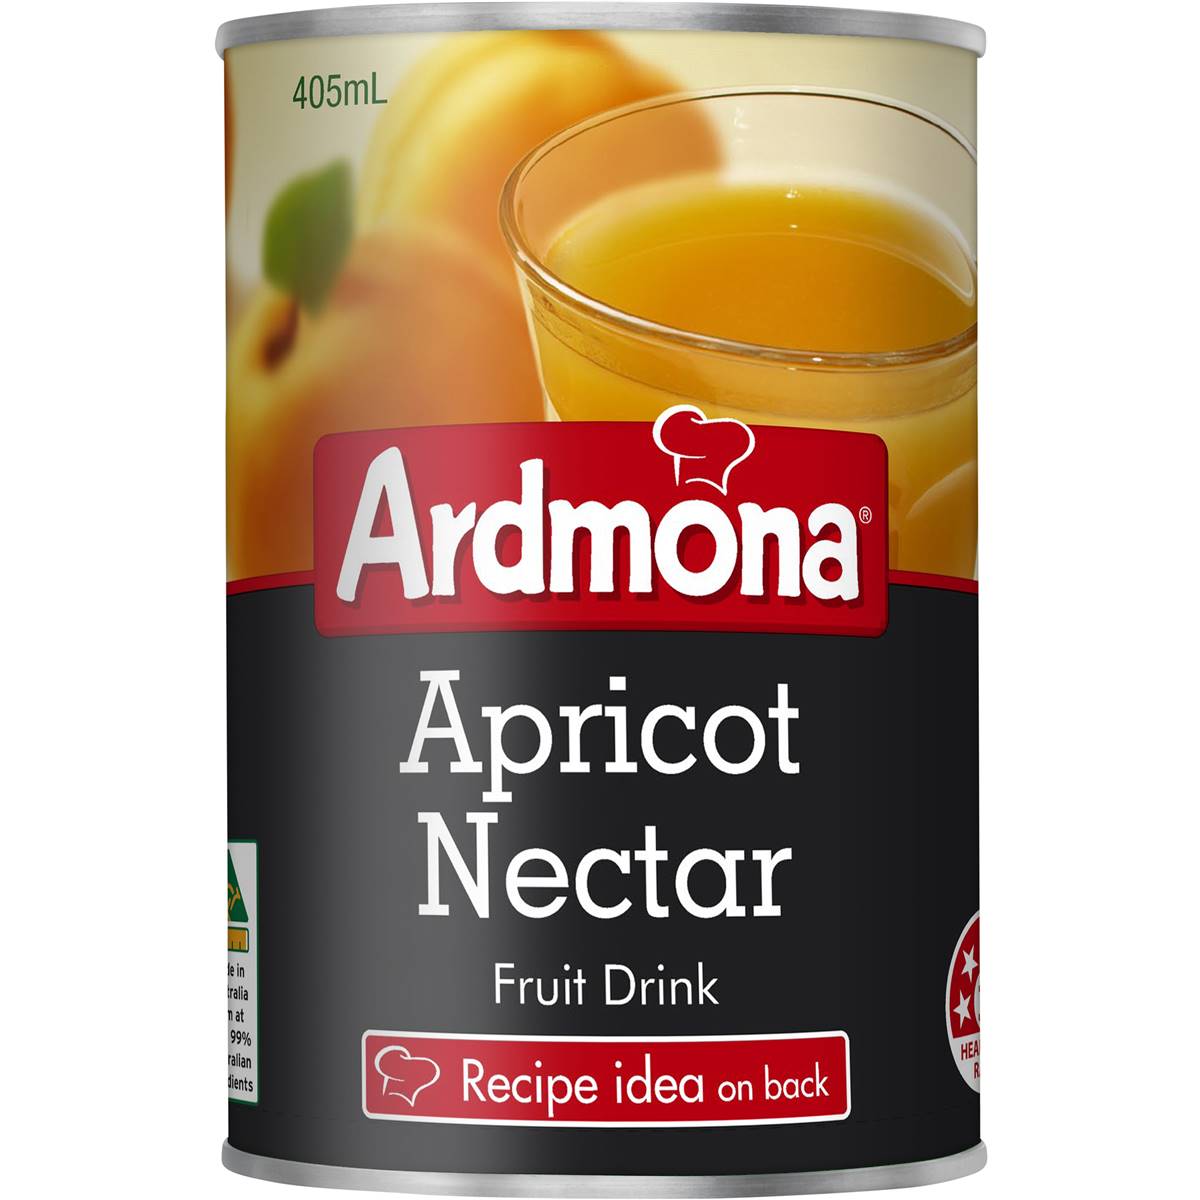 Calories in Ardmona Apricot Nectar Can